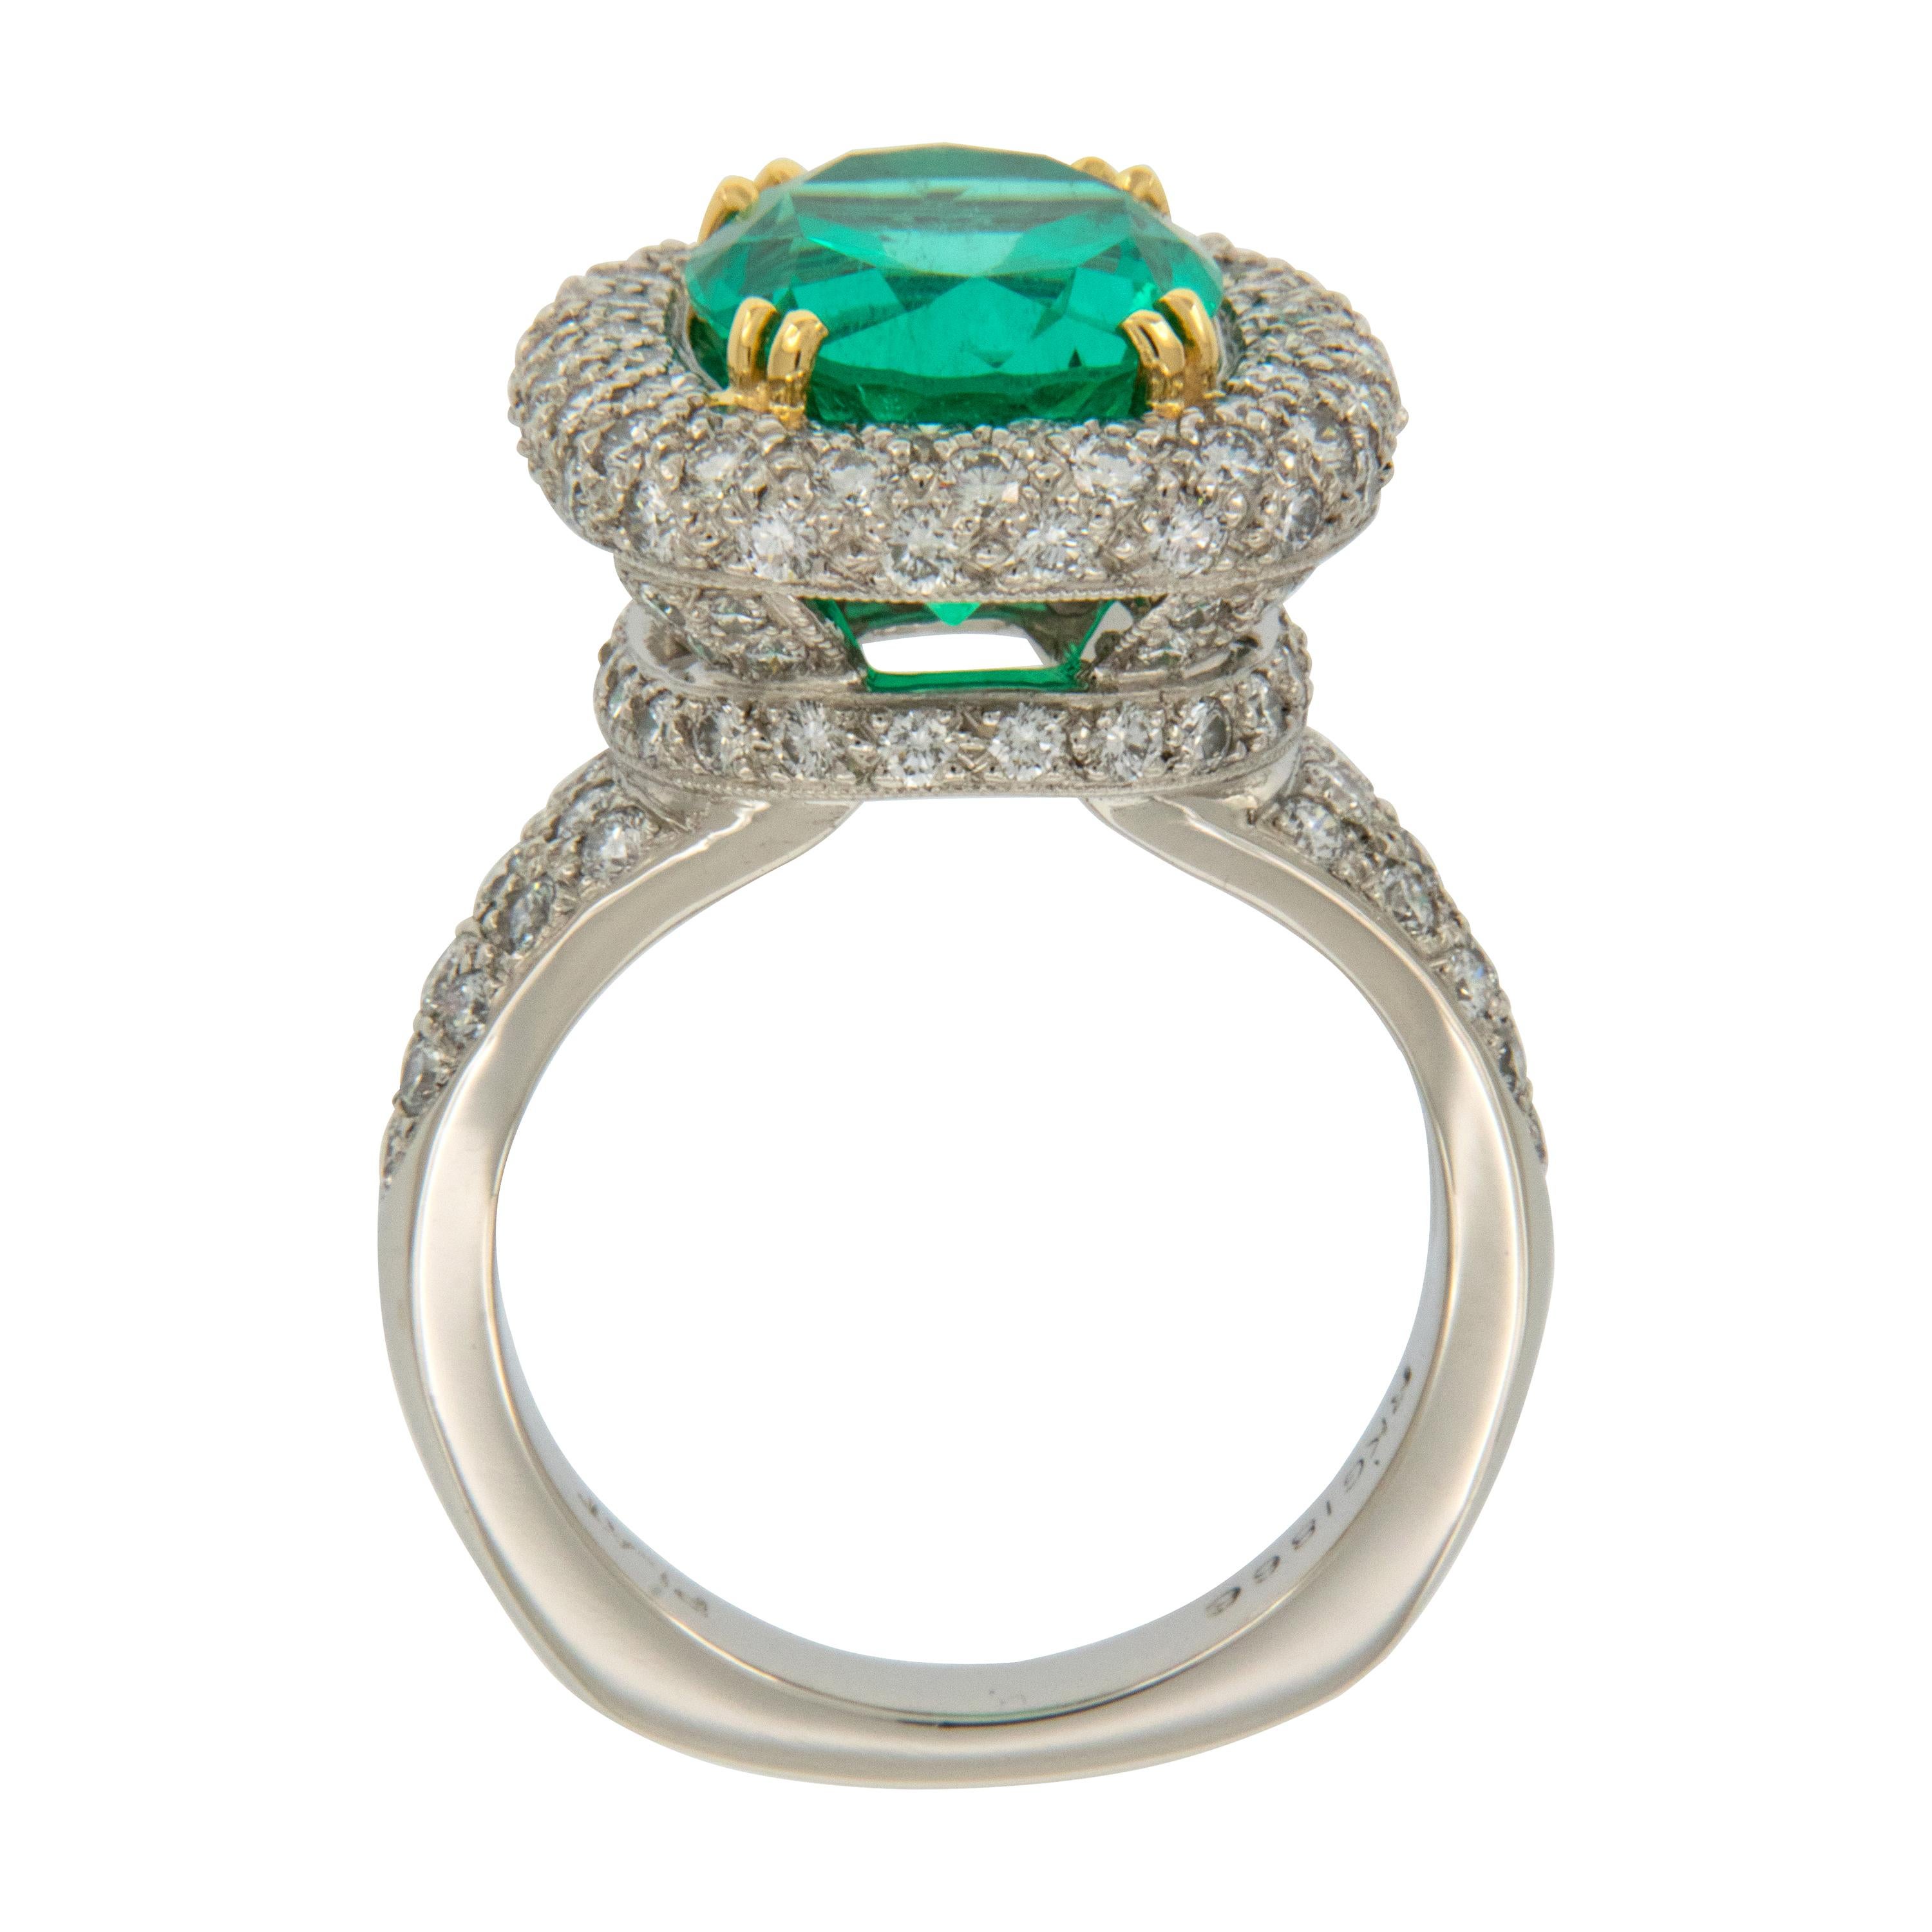 This stunning ring showcases a lively, extraordinarily clean 4.00 carat emerald of exceptional bluish green color. Surrounding the emerald are 2.00 Cttw of pave' set fine quality diamonds (F-G, VS) - all in a custom made ring with European shank.